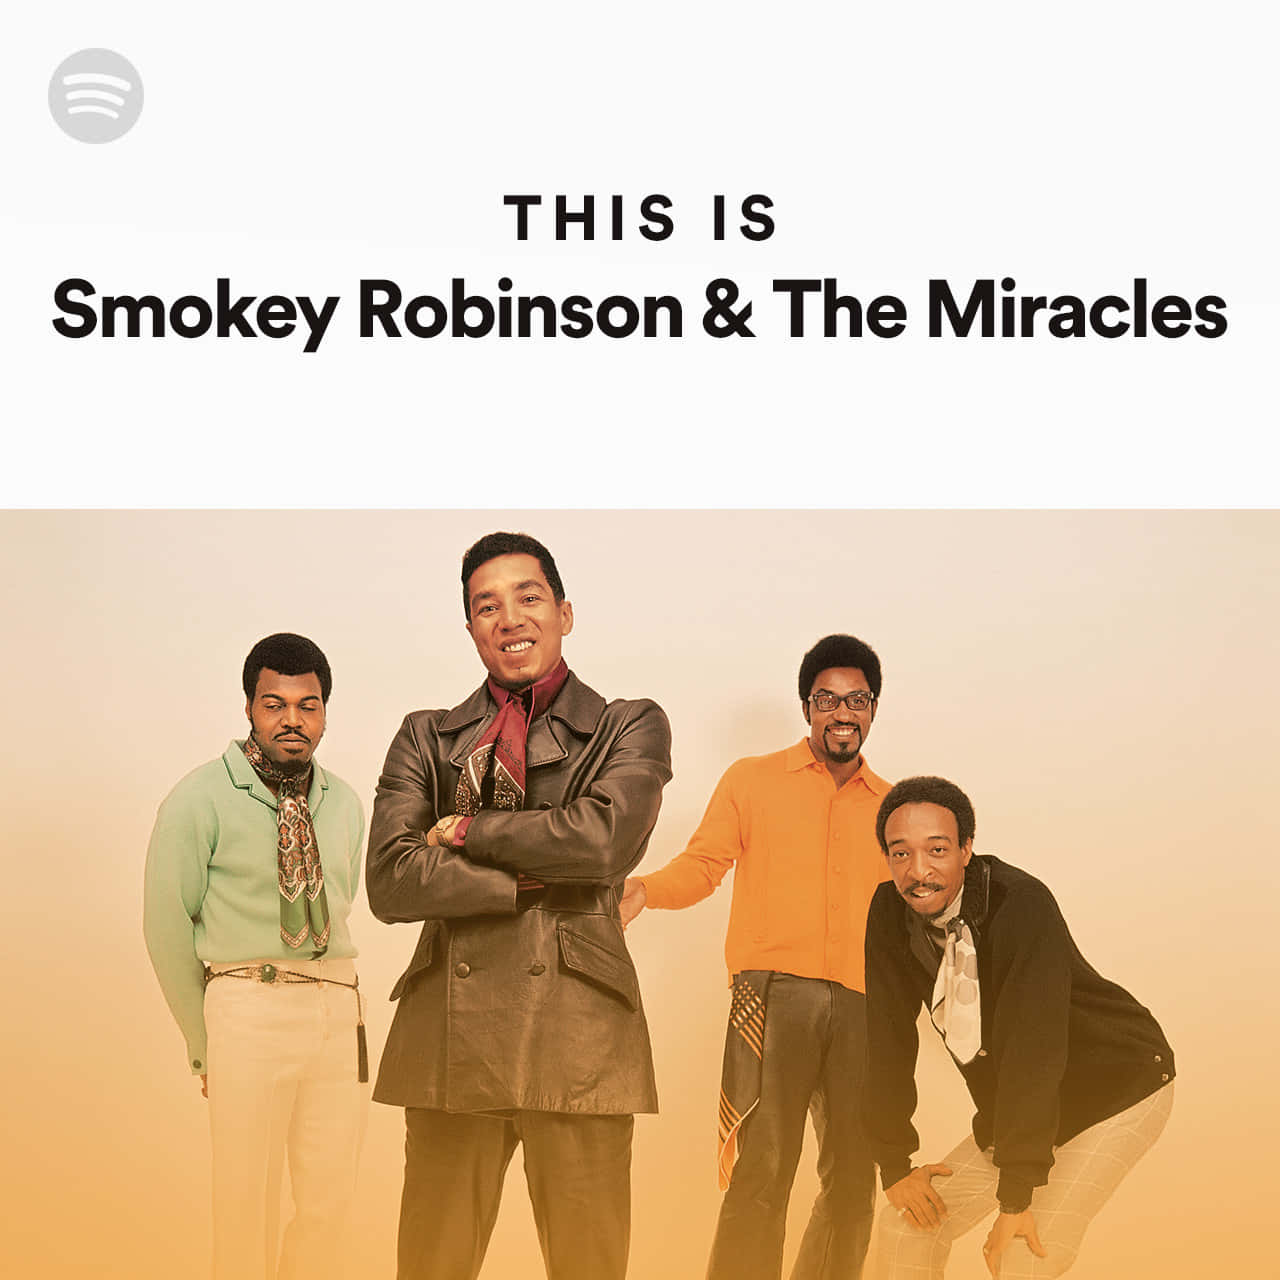 Celebrating the timeless music of Smokey Robinson and The Miracles Wallpaper